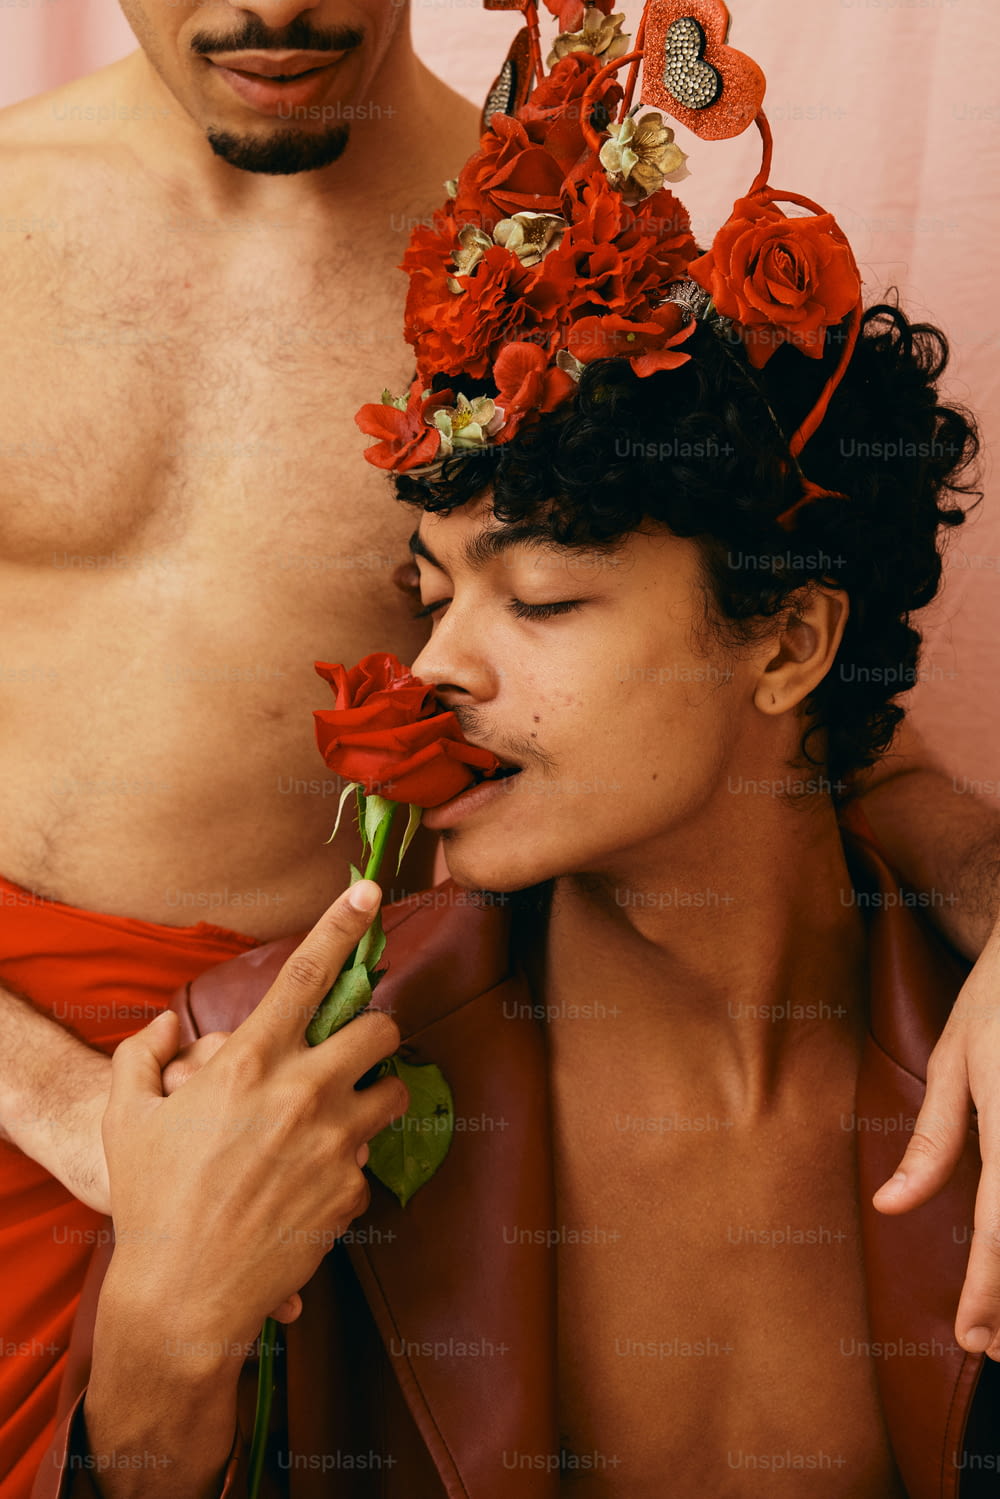 a shirtless man with a flower crown on his head